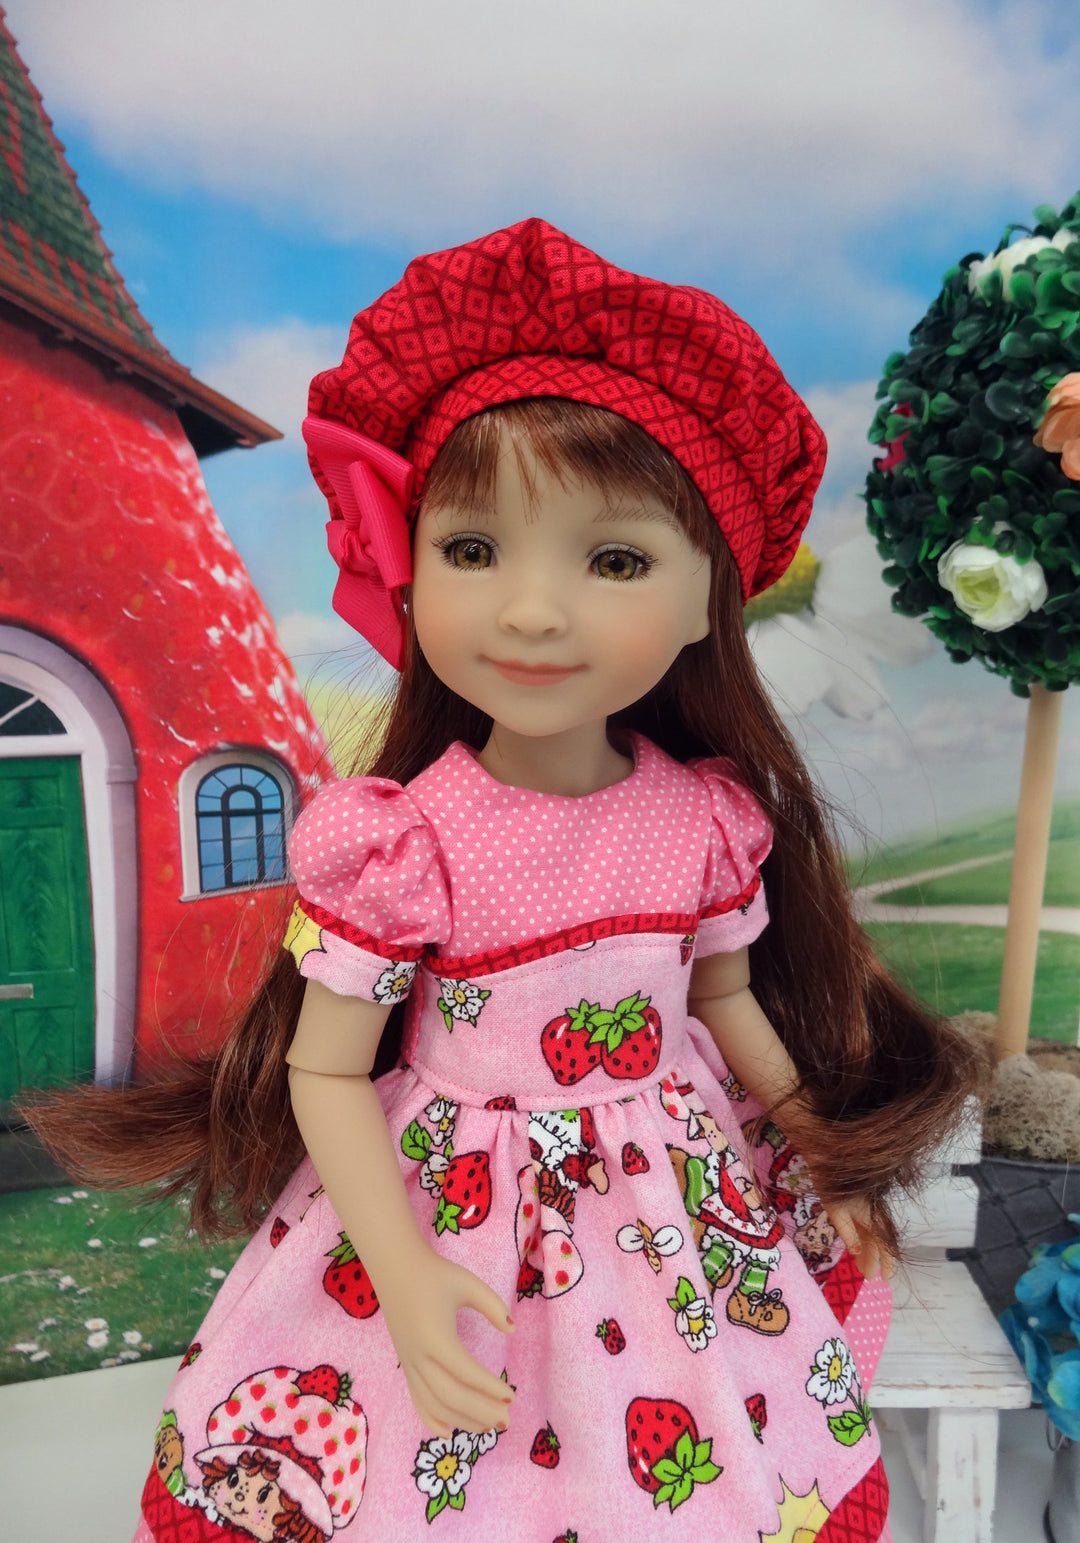 Vintage Shortcake - dress for Ruby Red Fashion Friends doll